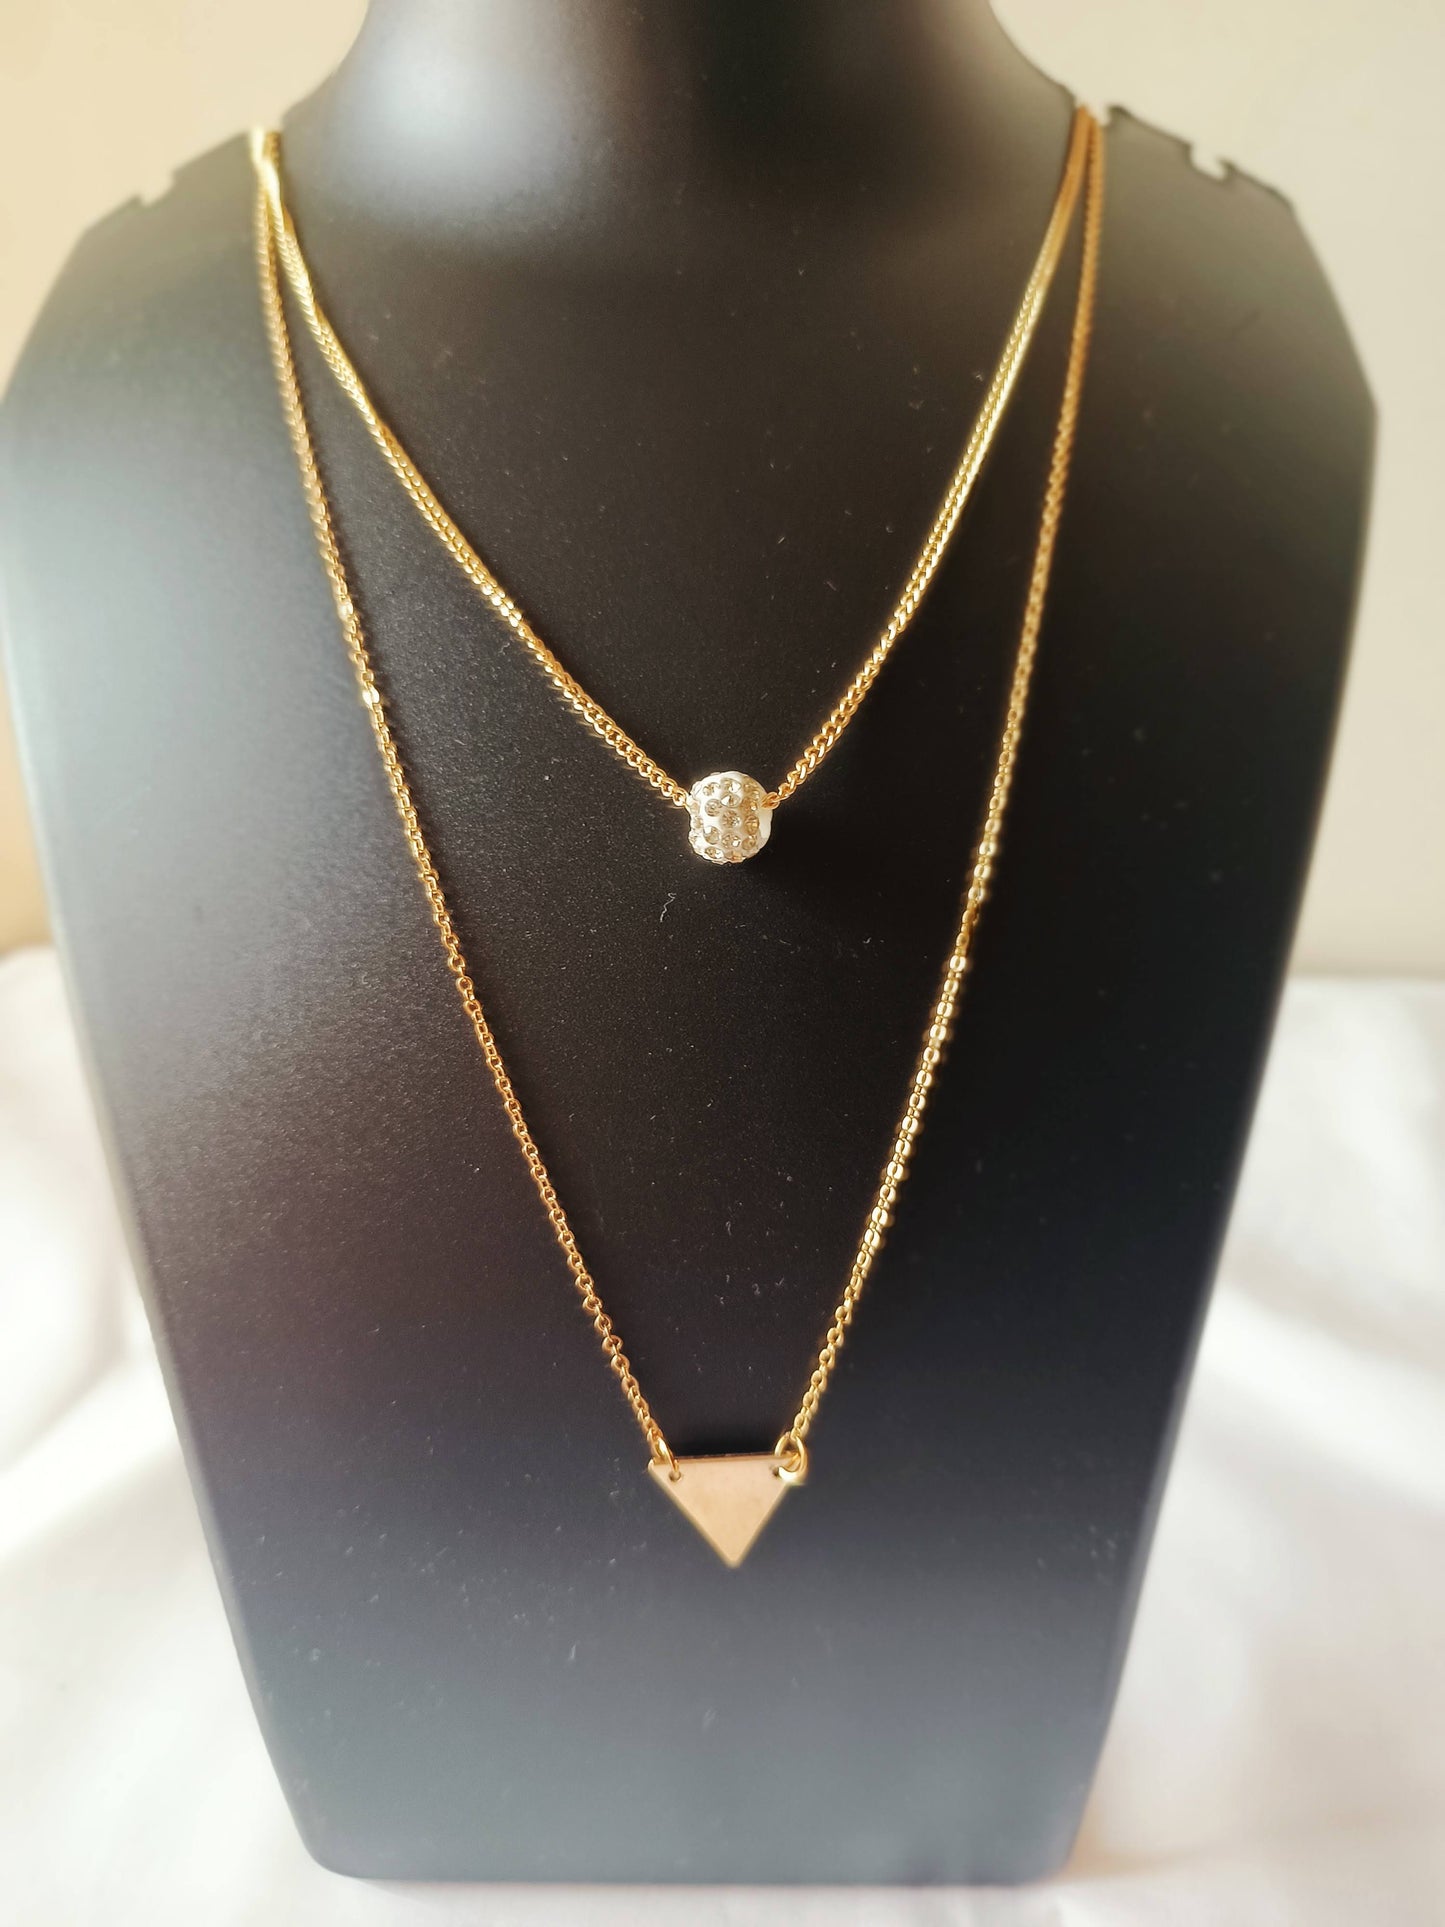 Double layered gold plated triangle neckpiece - Jewellery for women and girls